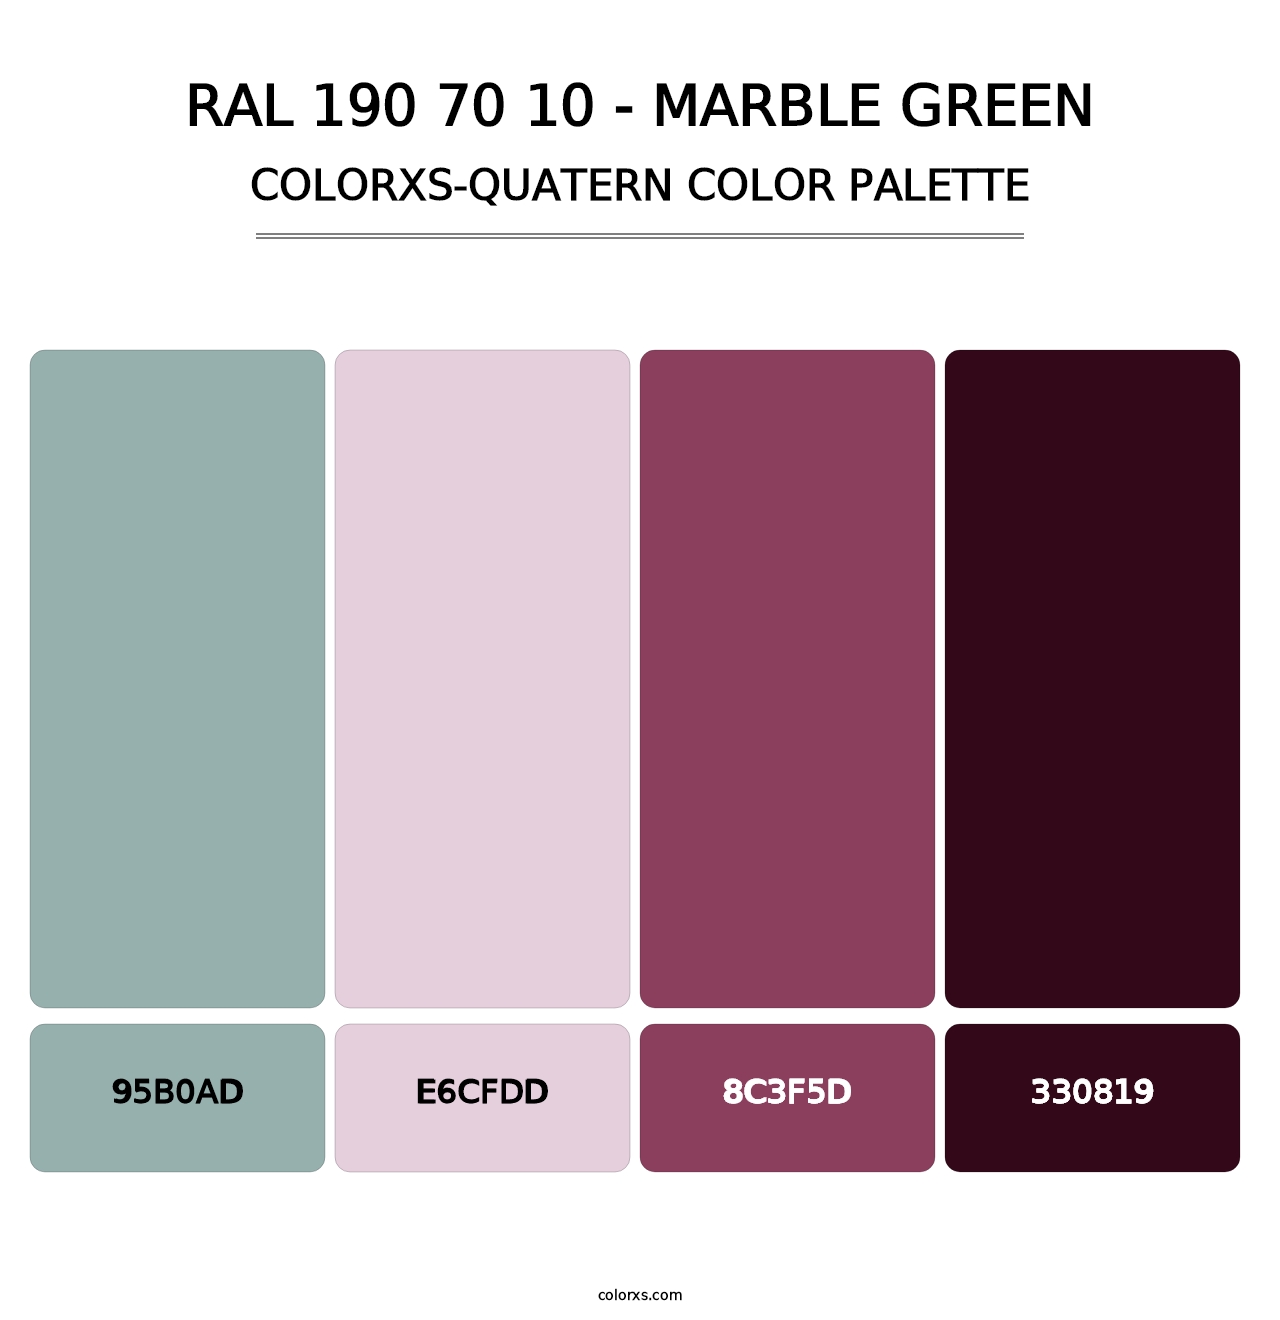 RAL 190 70 10 - Marble Green - Colorxs Quatern Palette